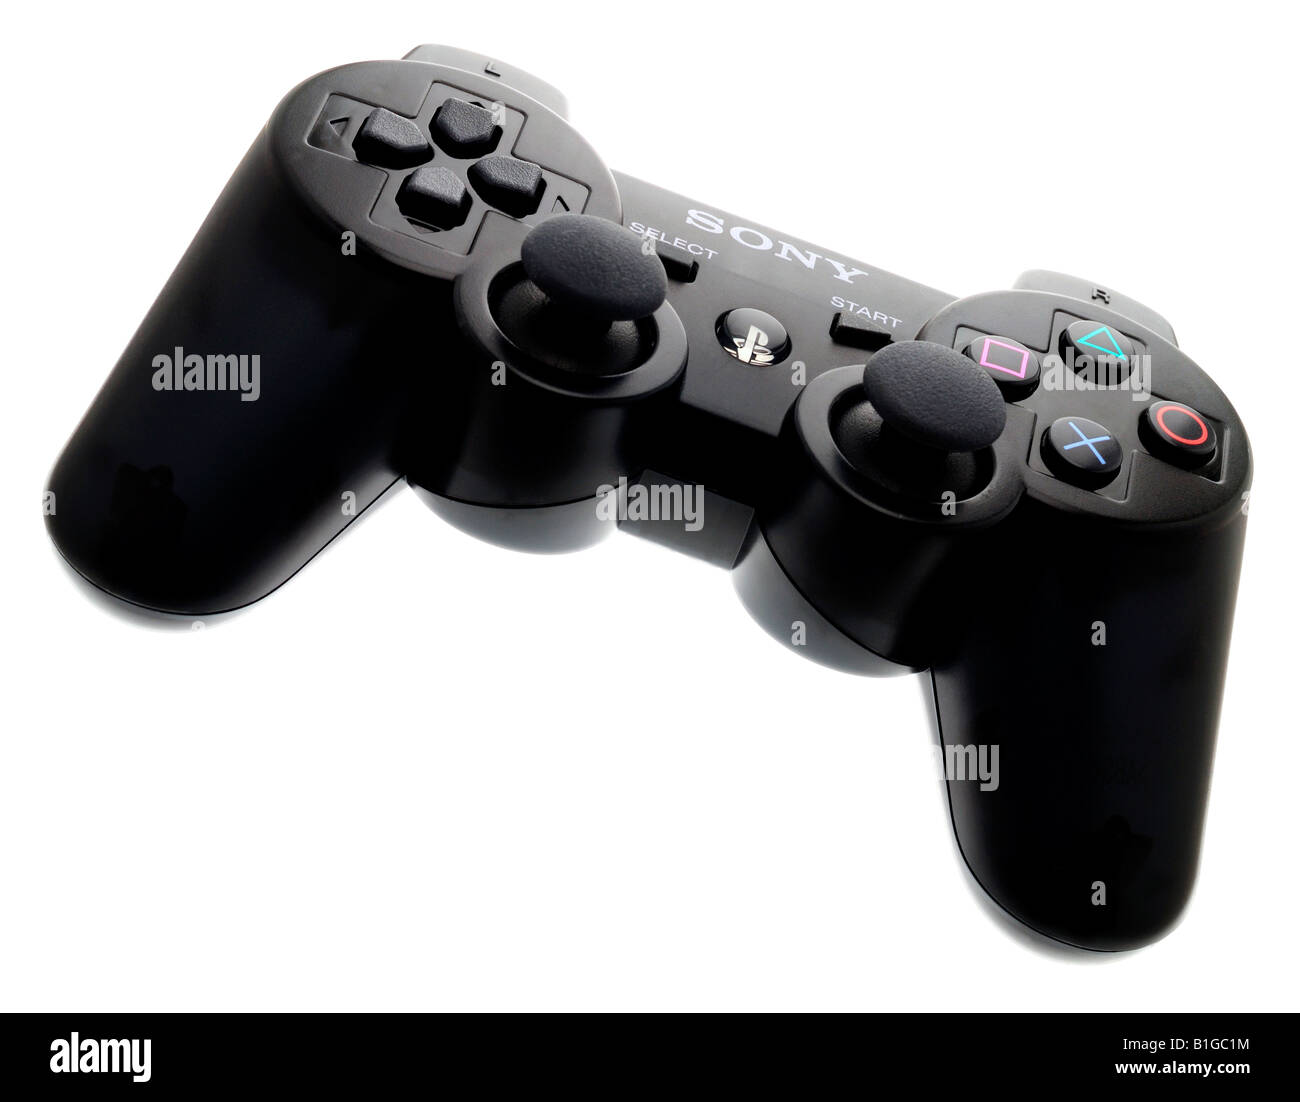 Play Station Wireless PS3 Hand Controller Stock Photo - Alamy